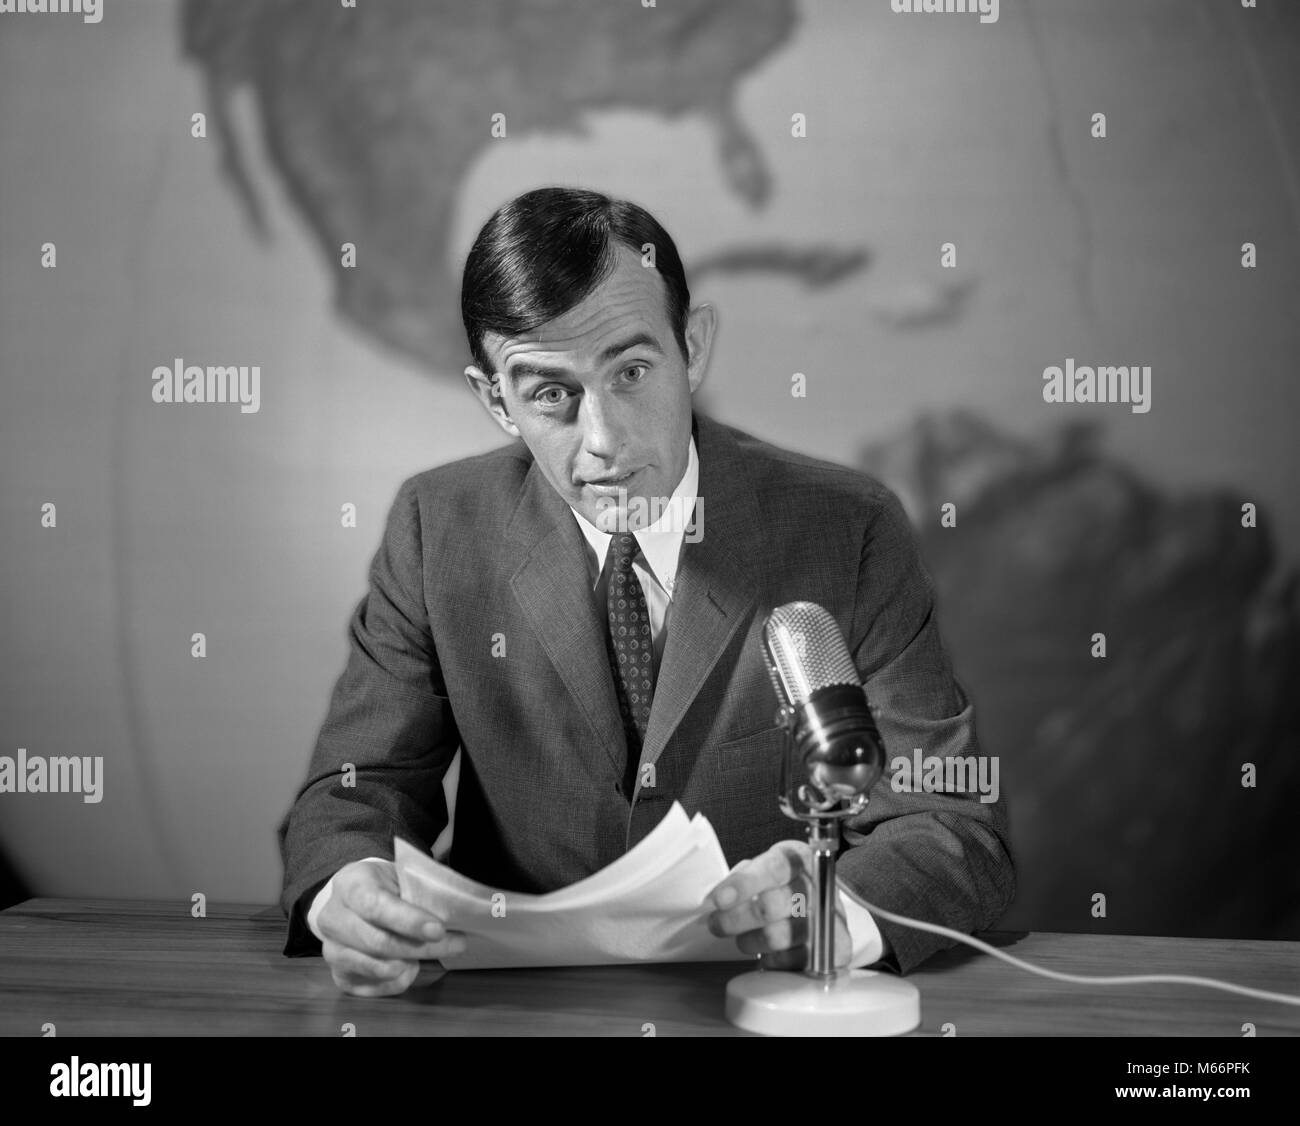 1960s 1970s NEWSMAN READING NEWS FROM PAPERS LOOKING AT CAMERA SPEAKING INTO MICROPHONE WORLD MAP BEHIND - r20836 HAR001 HARS ENTERTAINMENT CONFIDENCE JOURNALIST NOSTALGIA EYE CONTACT 25-30 YEARS 30-35 YEARS BROADCASTING ANNOUNCER AUTHORITY COMMUNICATE REPORTING COMMUNICATIONS JOURNALISM MALES MID-ADULT MID-ADULT MAN NEWSMAN ANNOUNCING B&W BLACK AND WHITE CAUCASIAN ETHNICITY LOOKING AT CAMERA NEWSCAST NEWSROOM OCCUPATIONS OLD FASHIONED PERSONS REPORTAGE Stock Photo